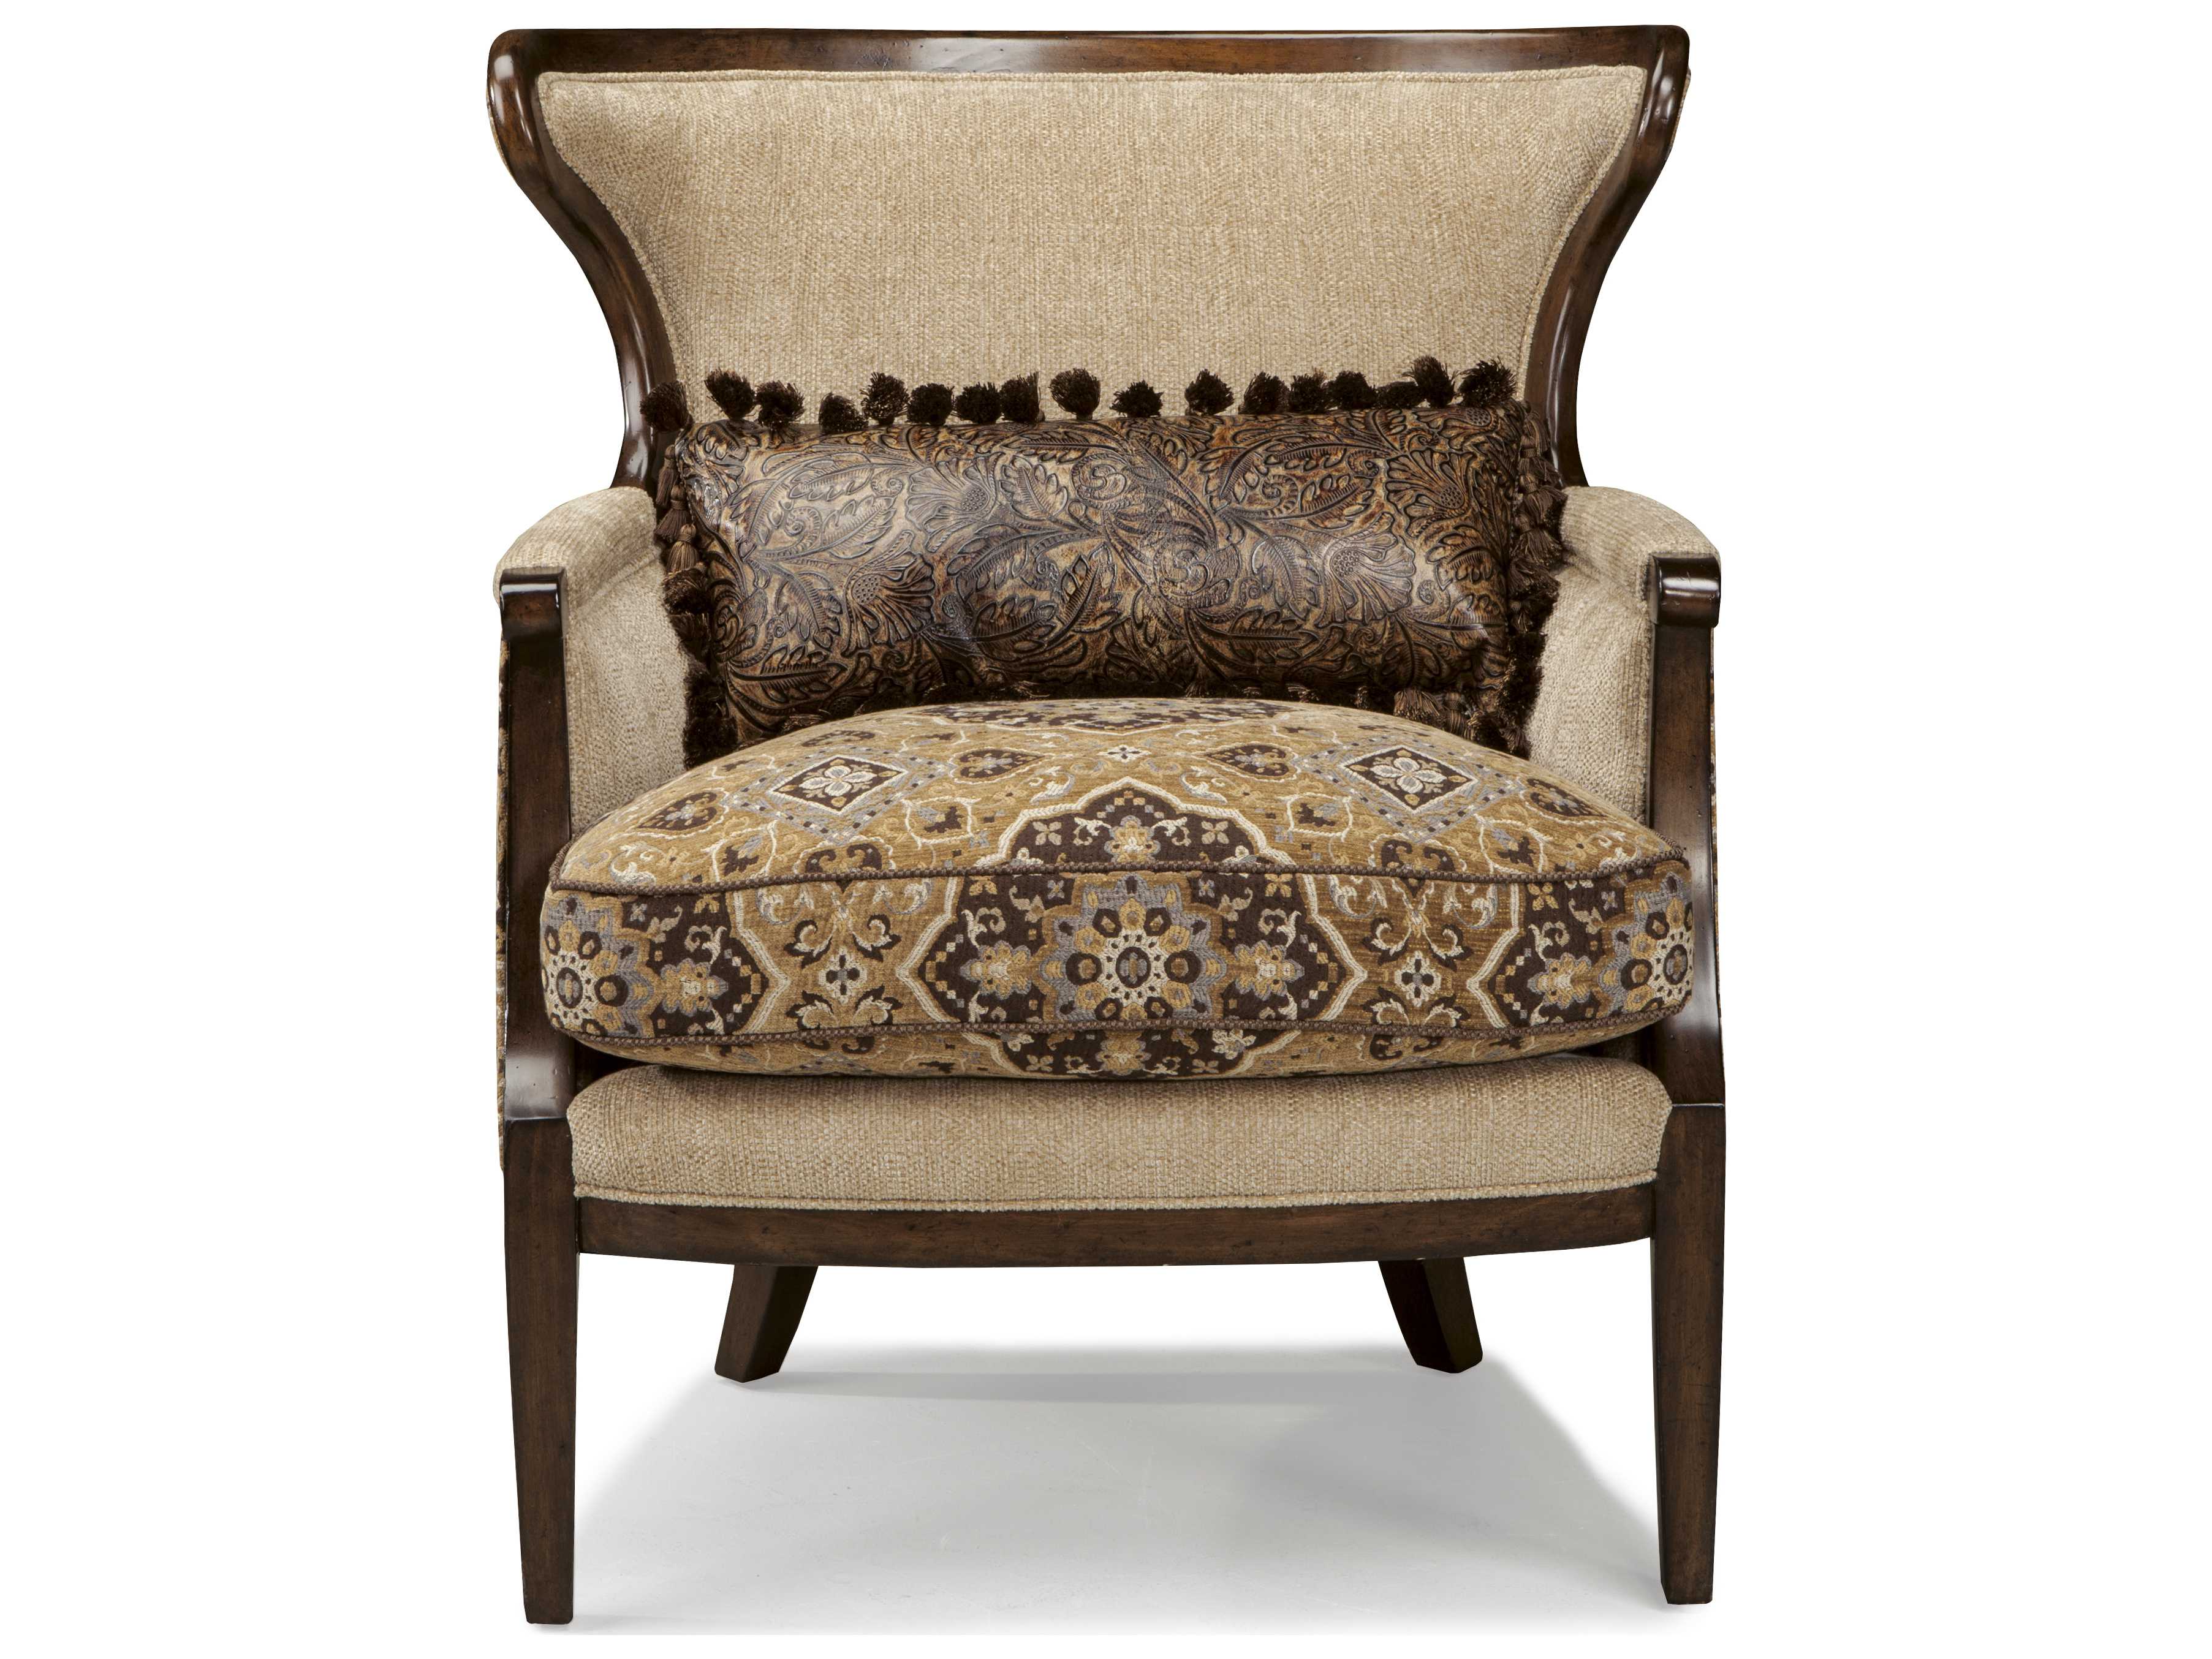 Rustic Accent Chairs For Living Room